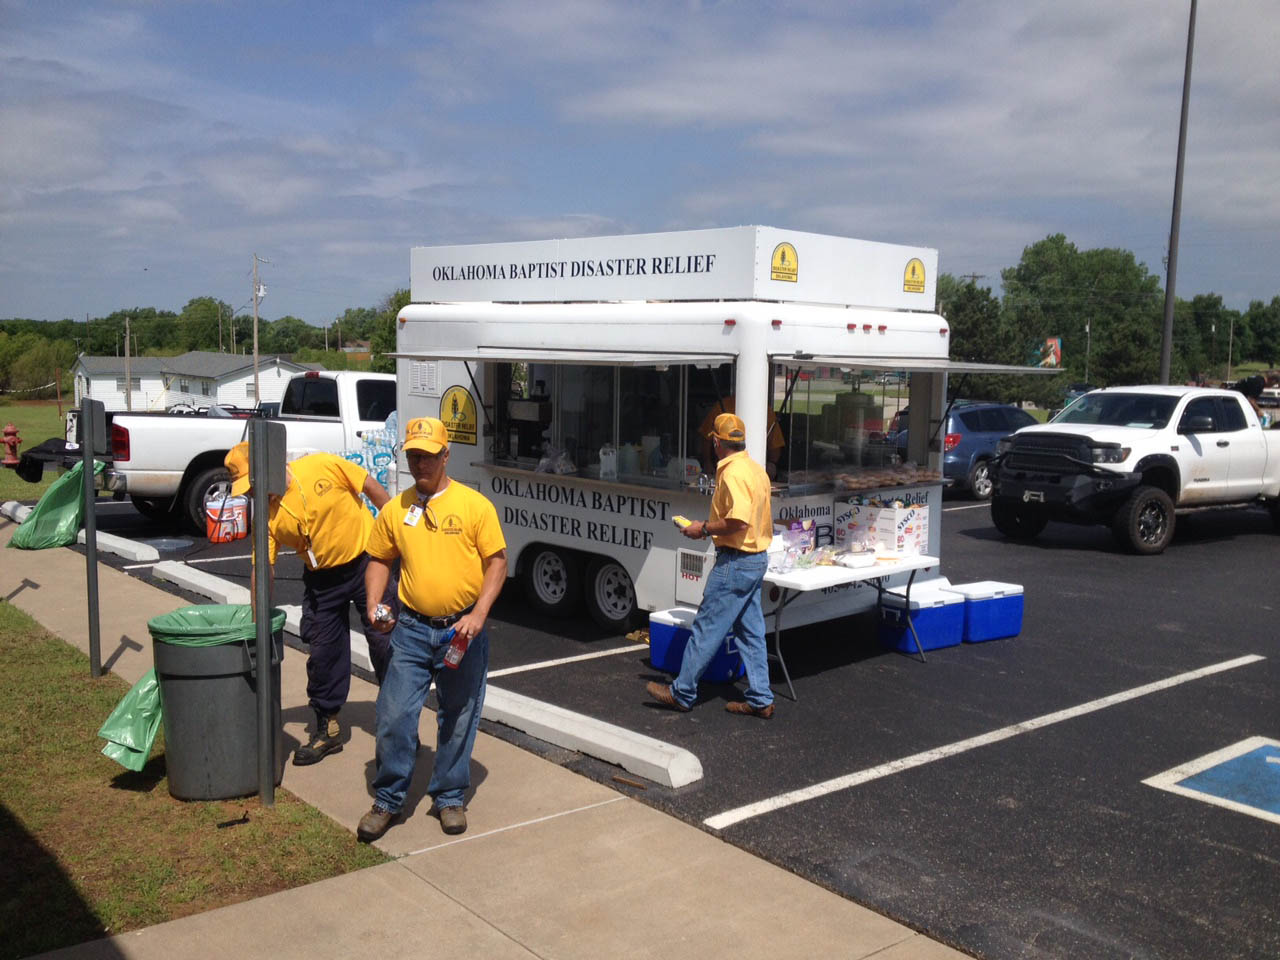 Oklahoma Baptist disaster relief volunteers serve meals on Thursday to victims and volunteer workers, at Snow Hill Baptist Church near Tuttle. (Photo: Brad Biddy)